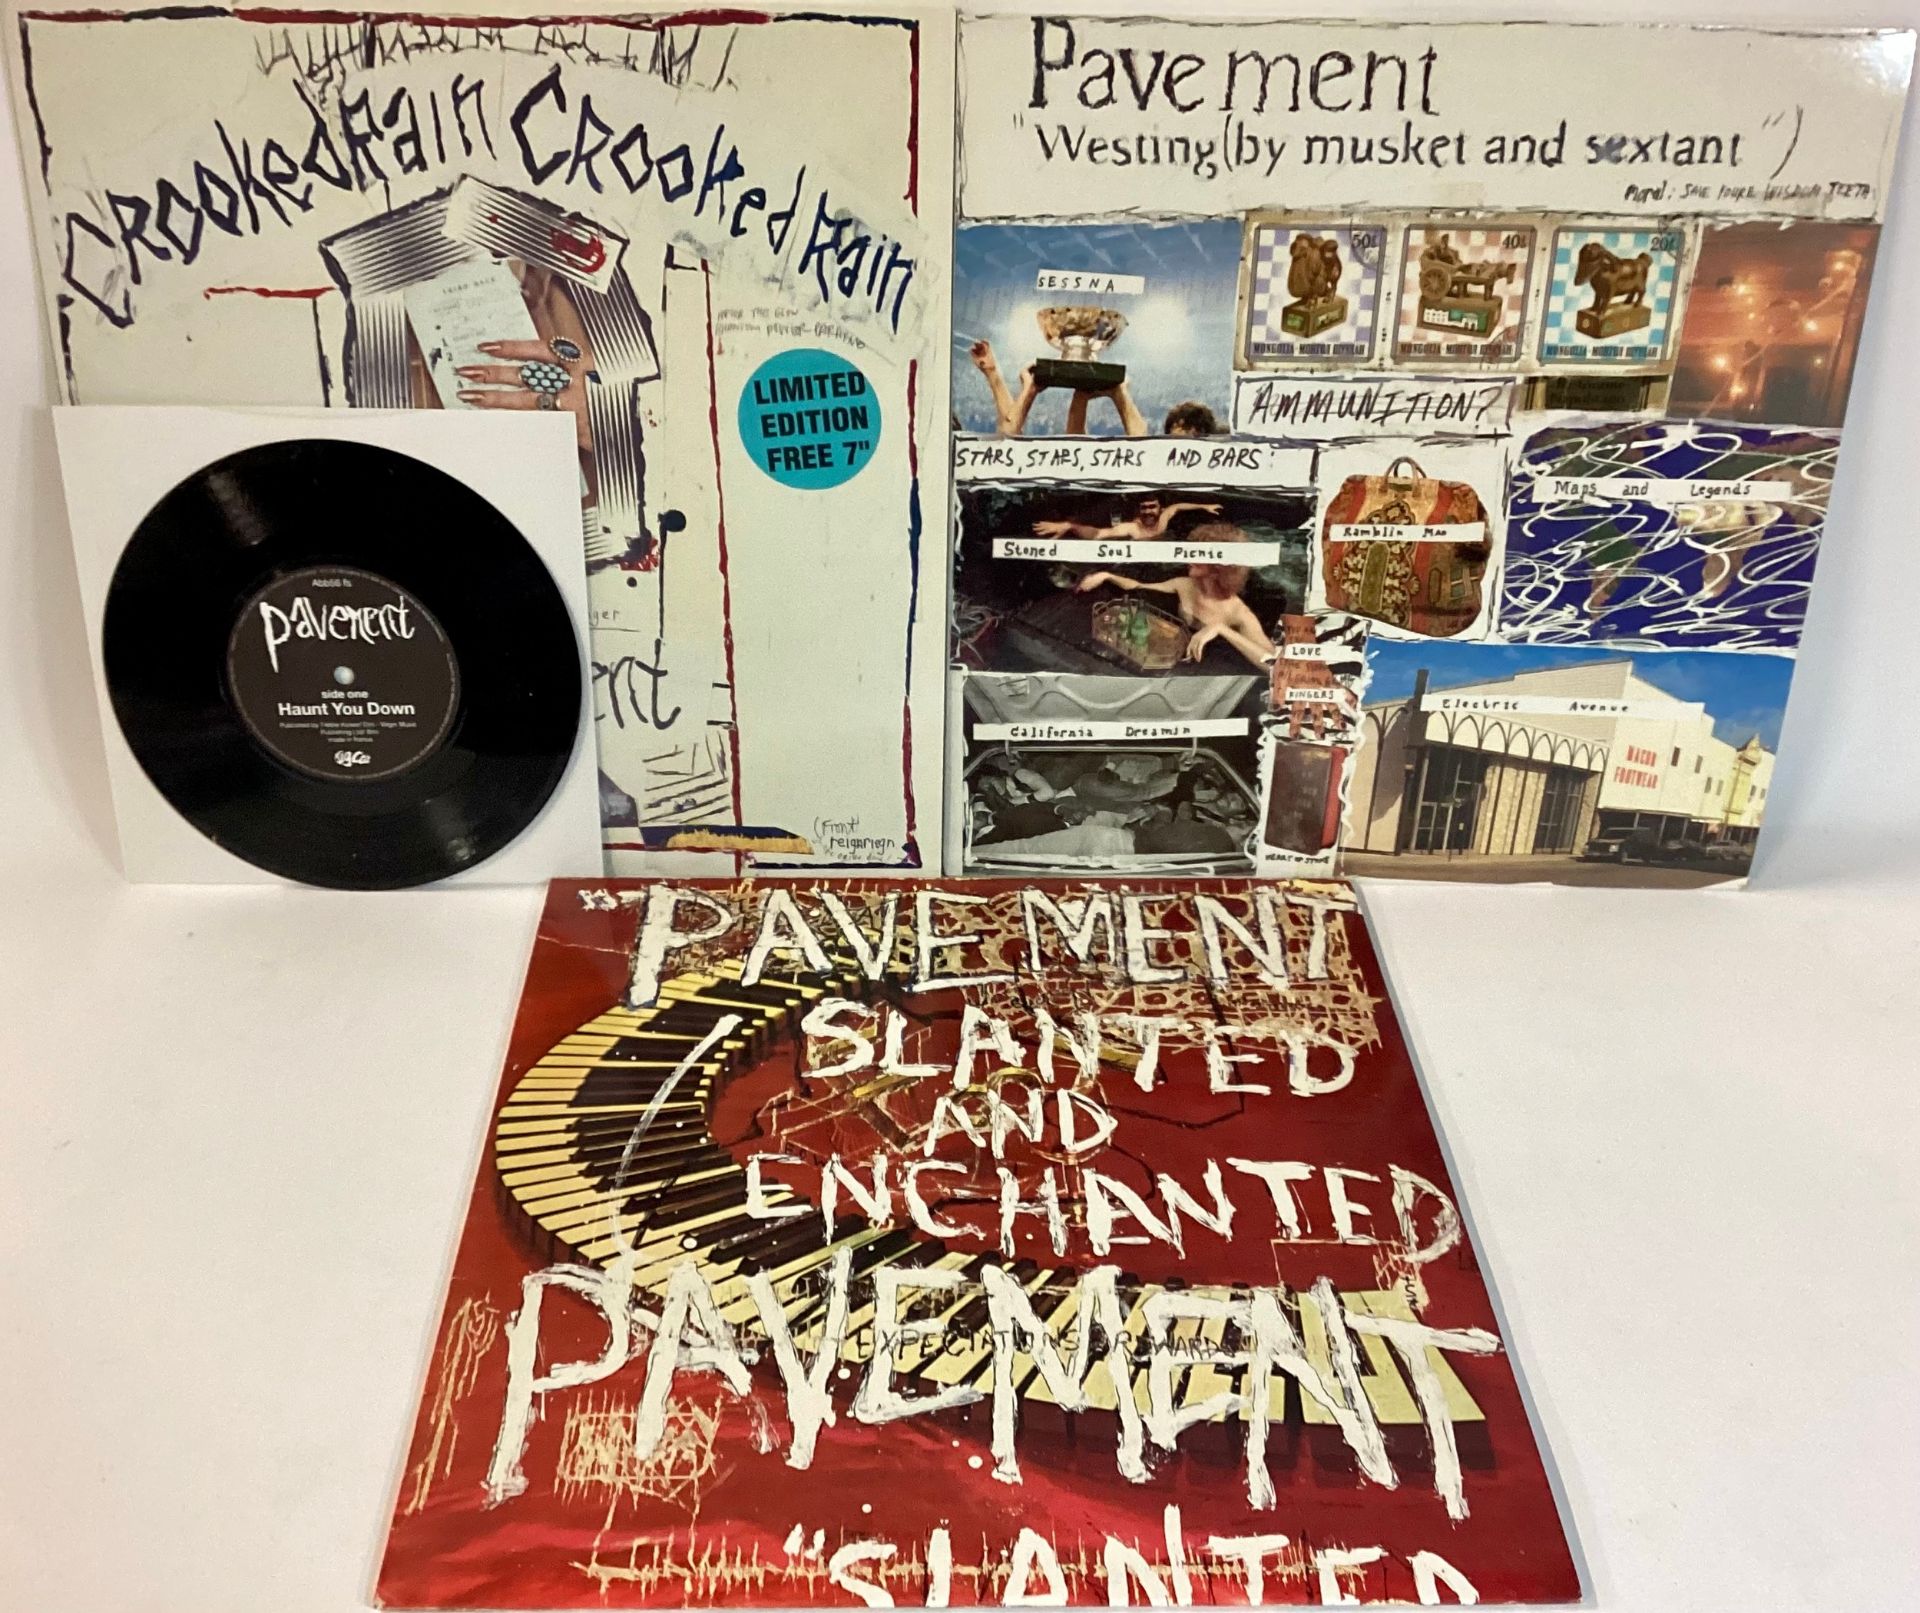 PAVEMENT VINYL ALBUMS X 3. Title’s here are - Slanted And Enchanted - Westing - Crooked Rain. All